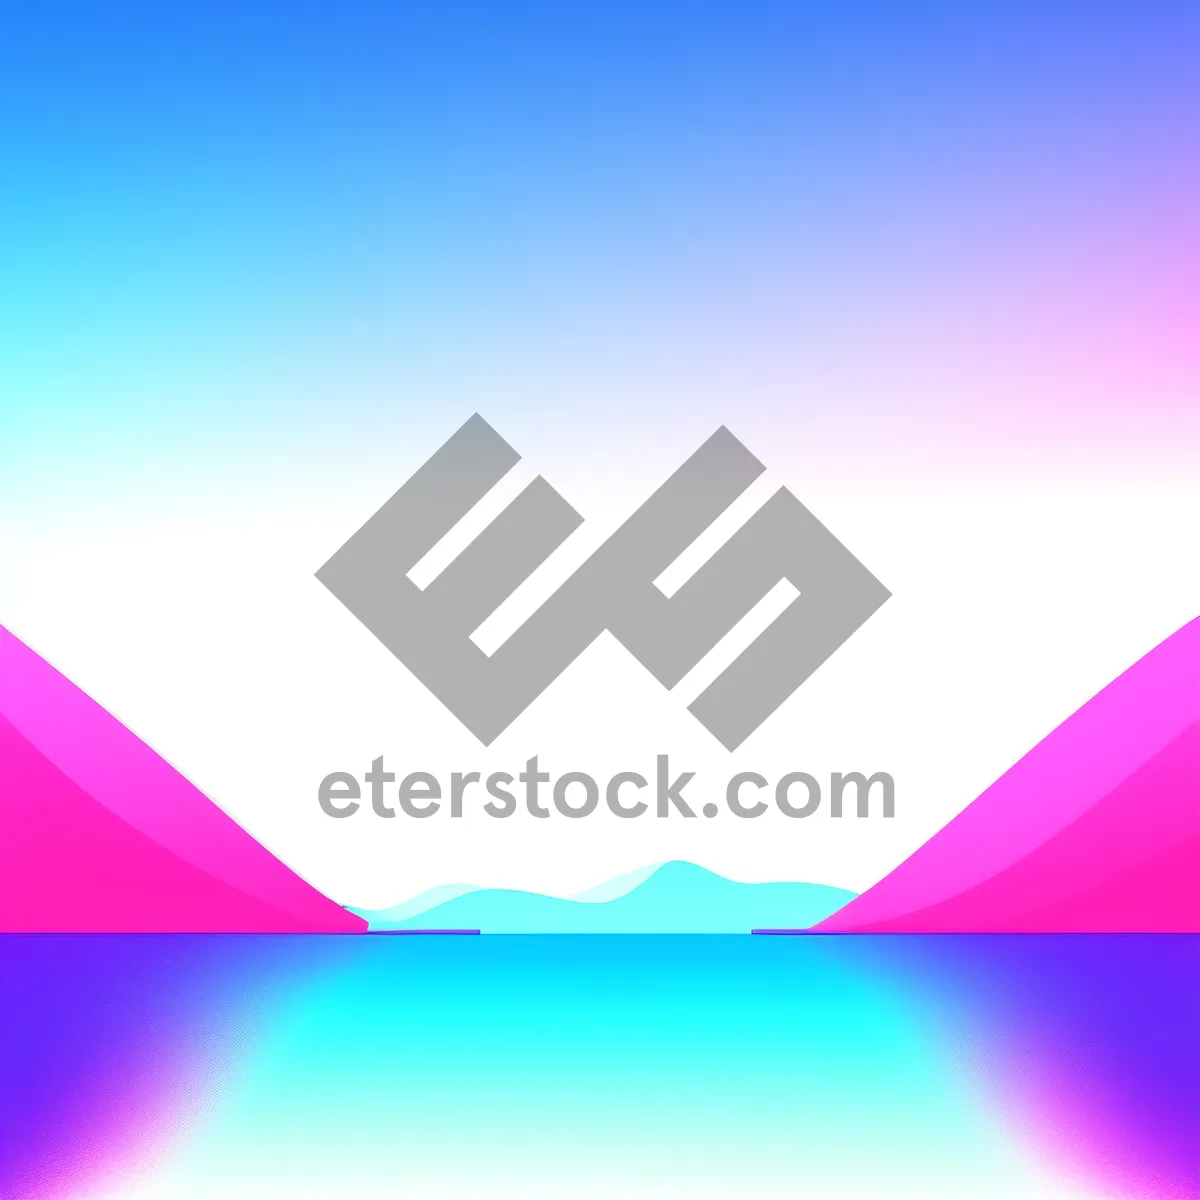 Picture of Vibrant Energy: A Digital Fractal Artwork with Gradient Colors